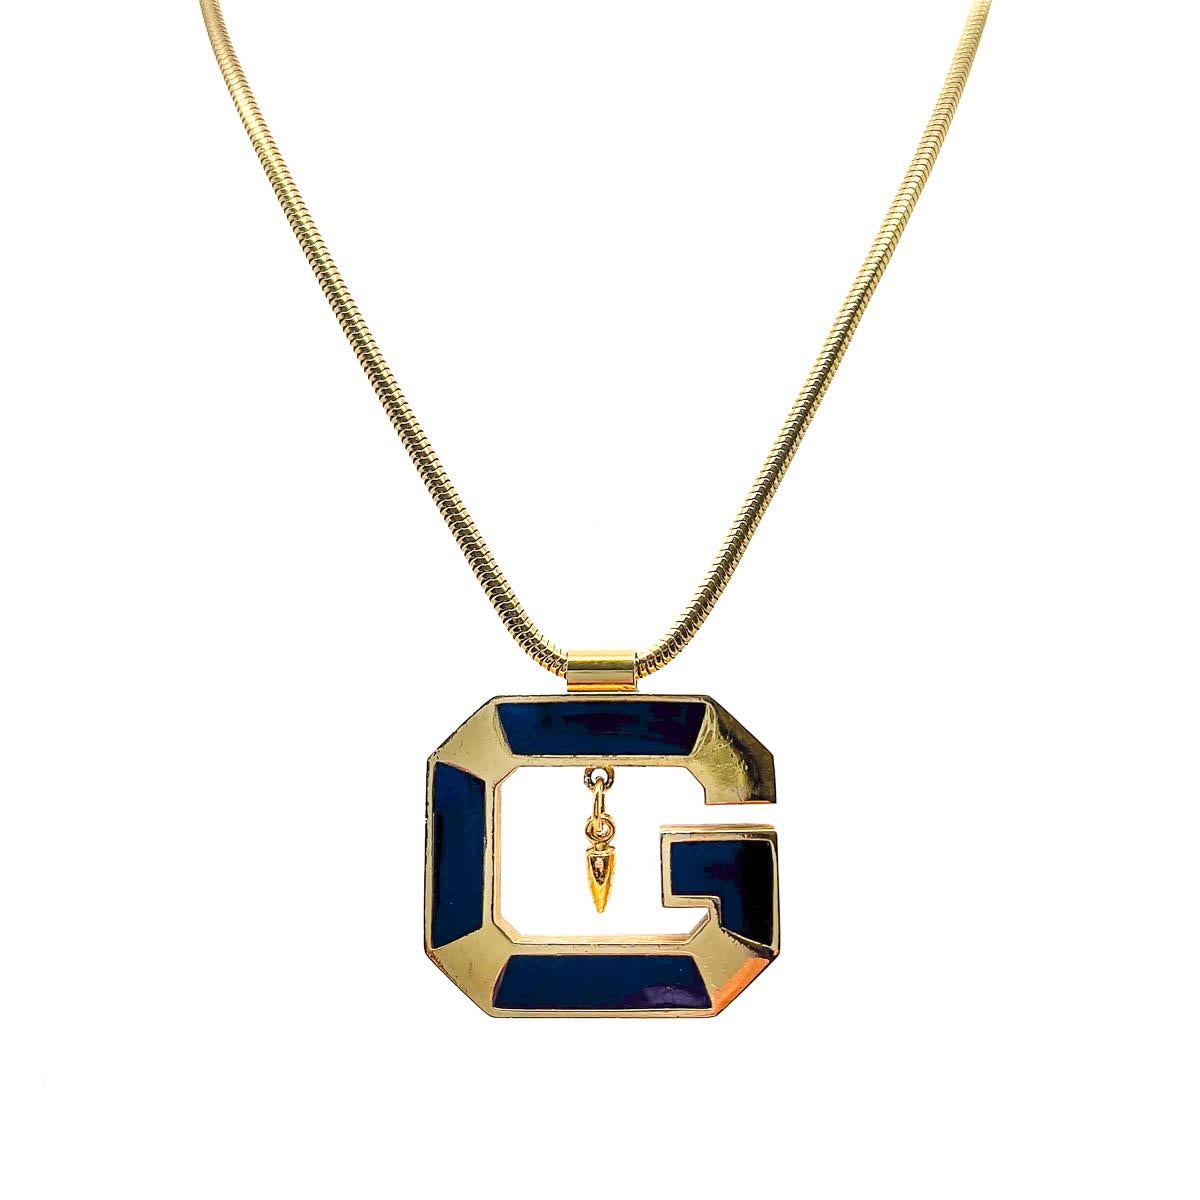 Vintage Givenchy Enamel G Motif Necklace 1970s In Good Condition For Sale In Wilmslow, GB